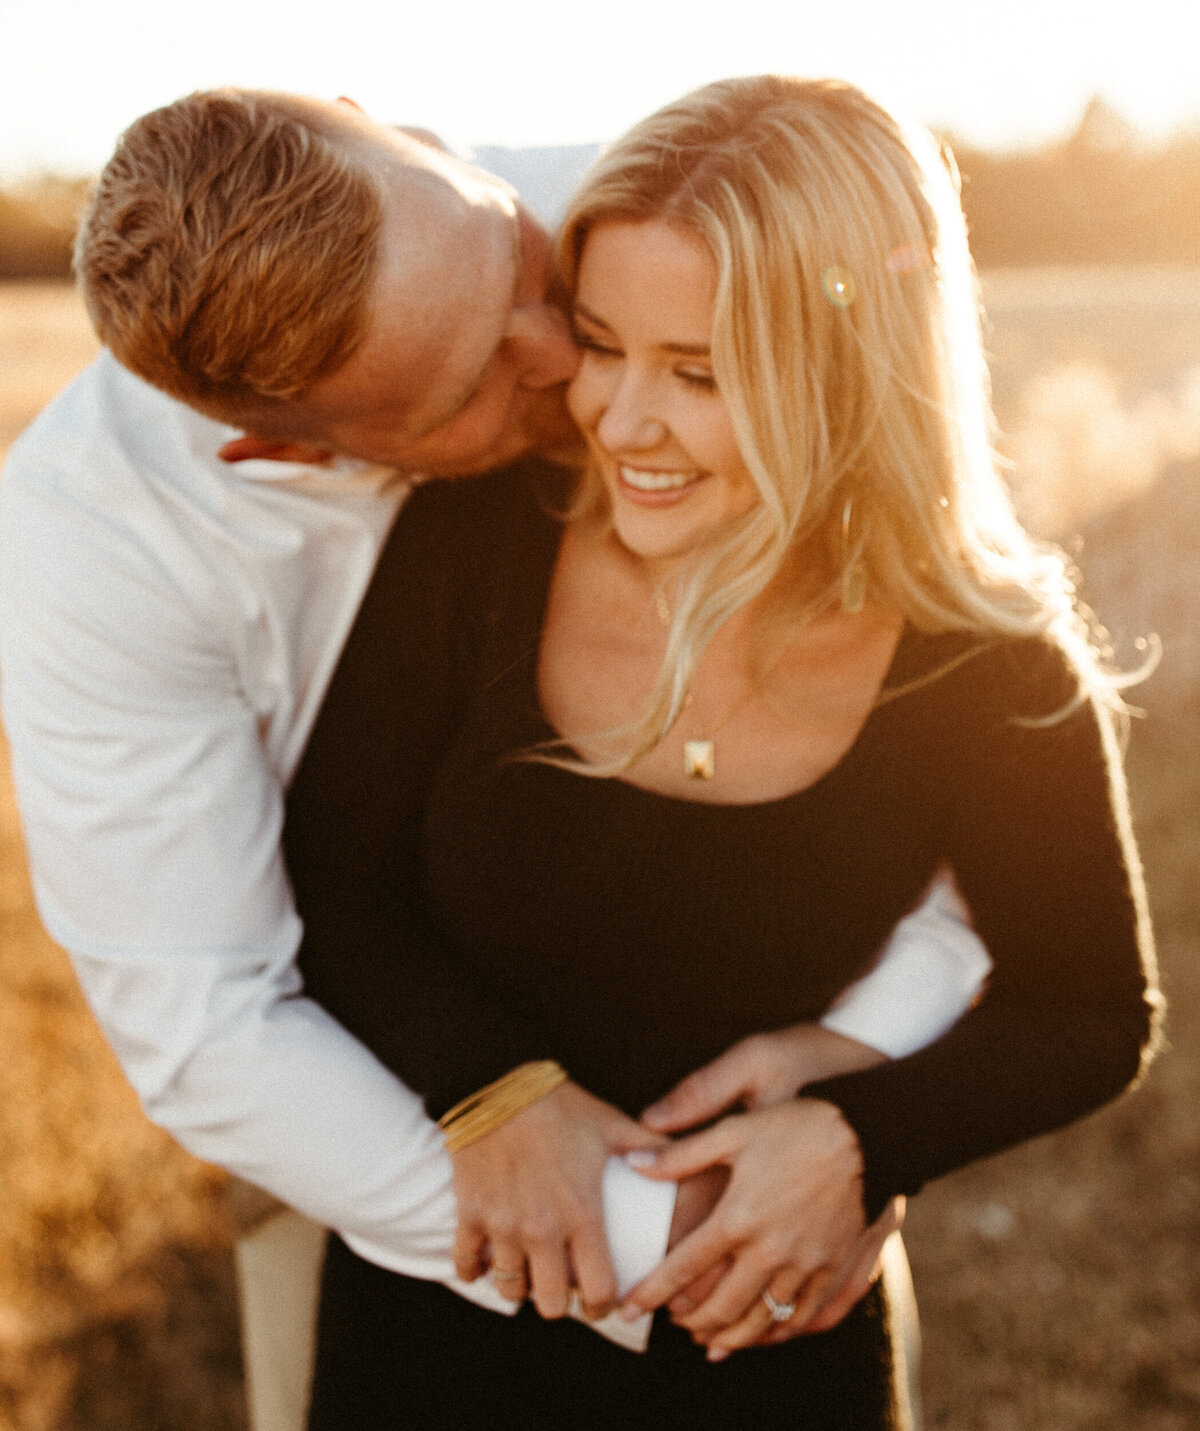 mississippi-golden-hour-sunset-tall-grass-grassy-field-engagement-session-couples-photoshoot-2